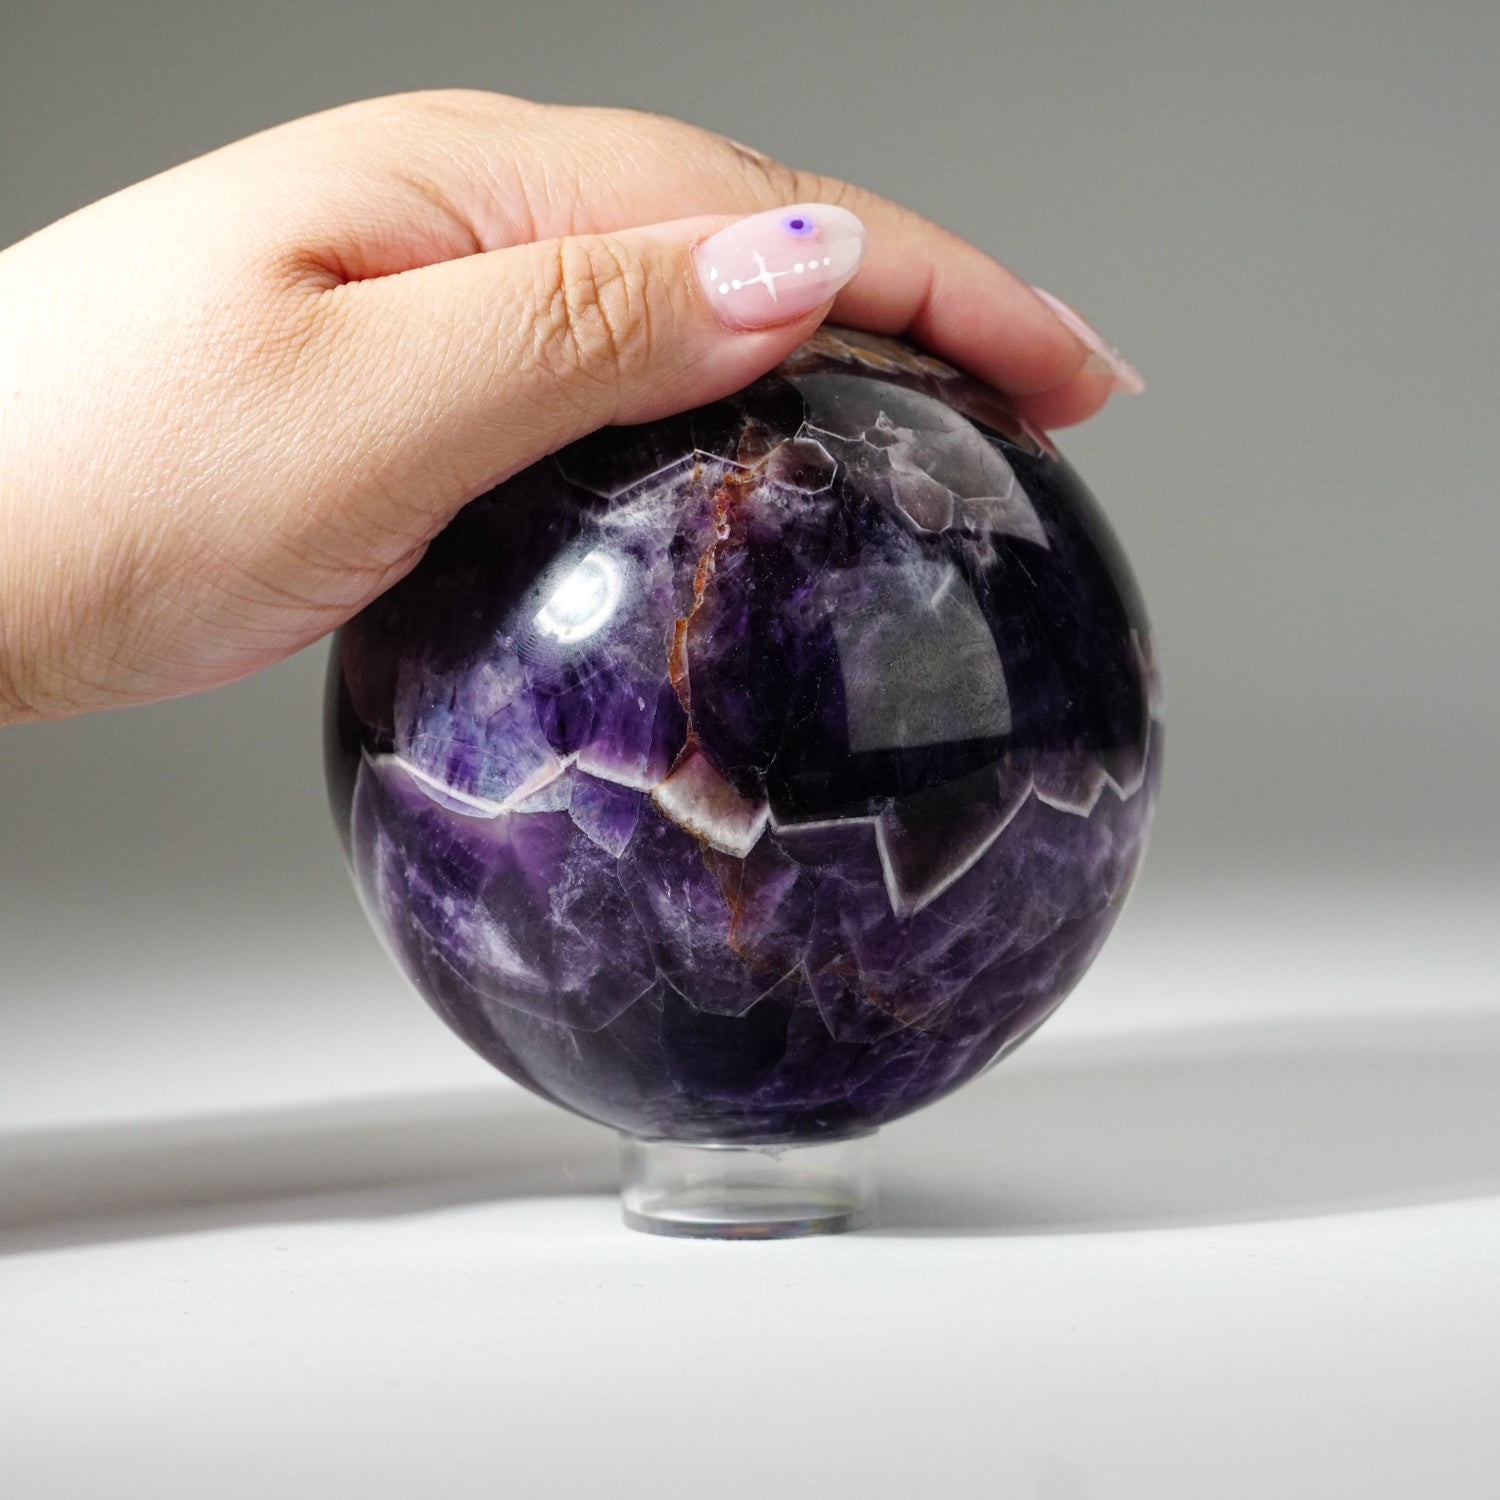 Polished Chevron Amethyst Sphere from Brazil (4", 3.2 lbs)